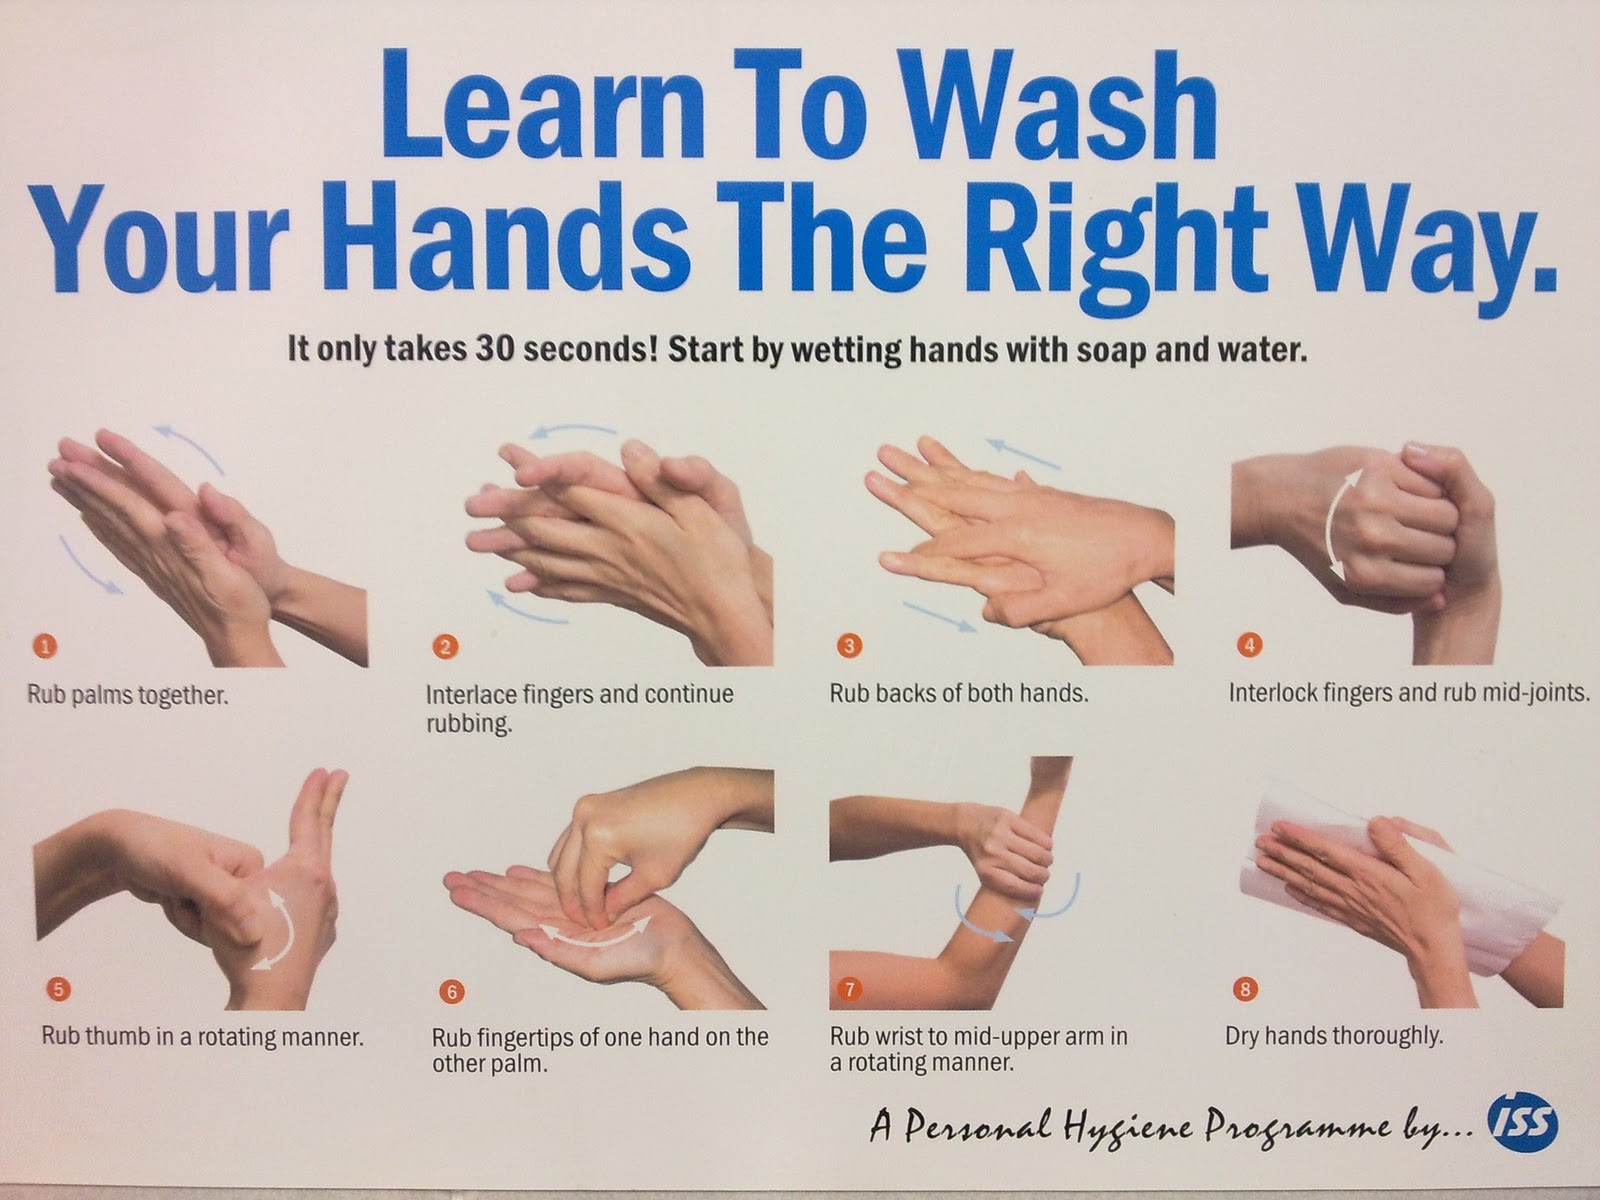 Frequent hand-washing is one of the most effective ways to avoid getting si...